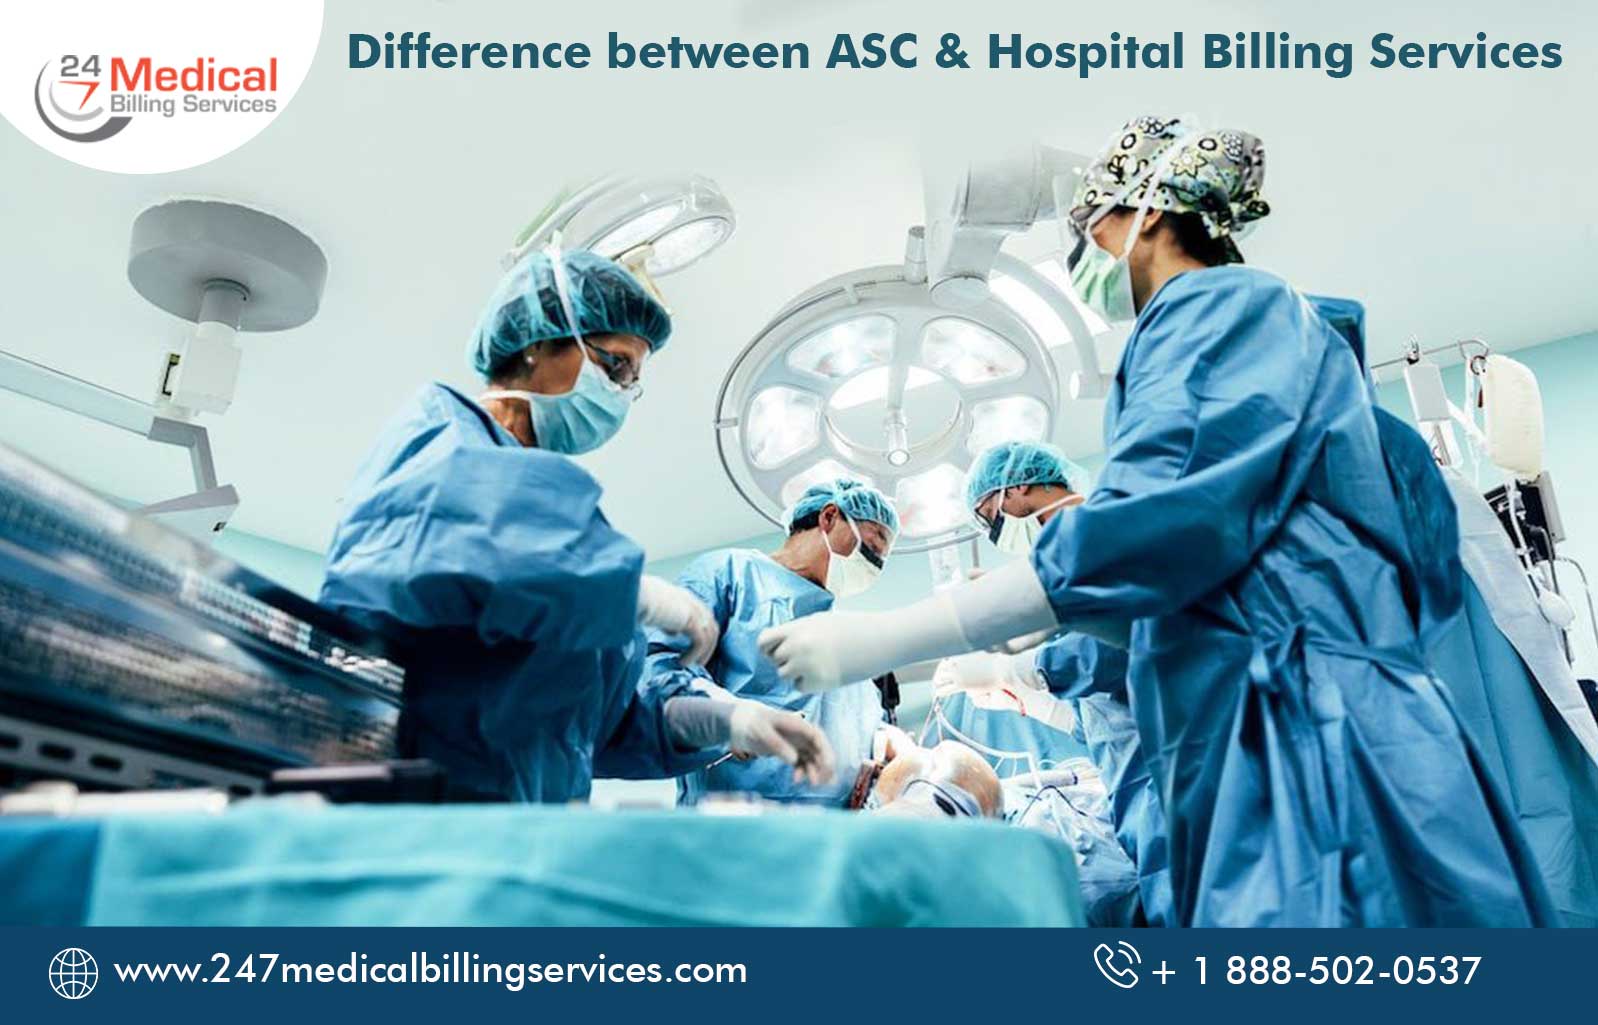  Difference Between ASC & Hospital Billing Services